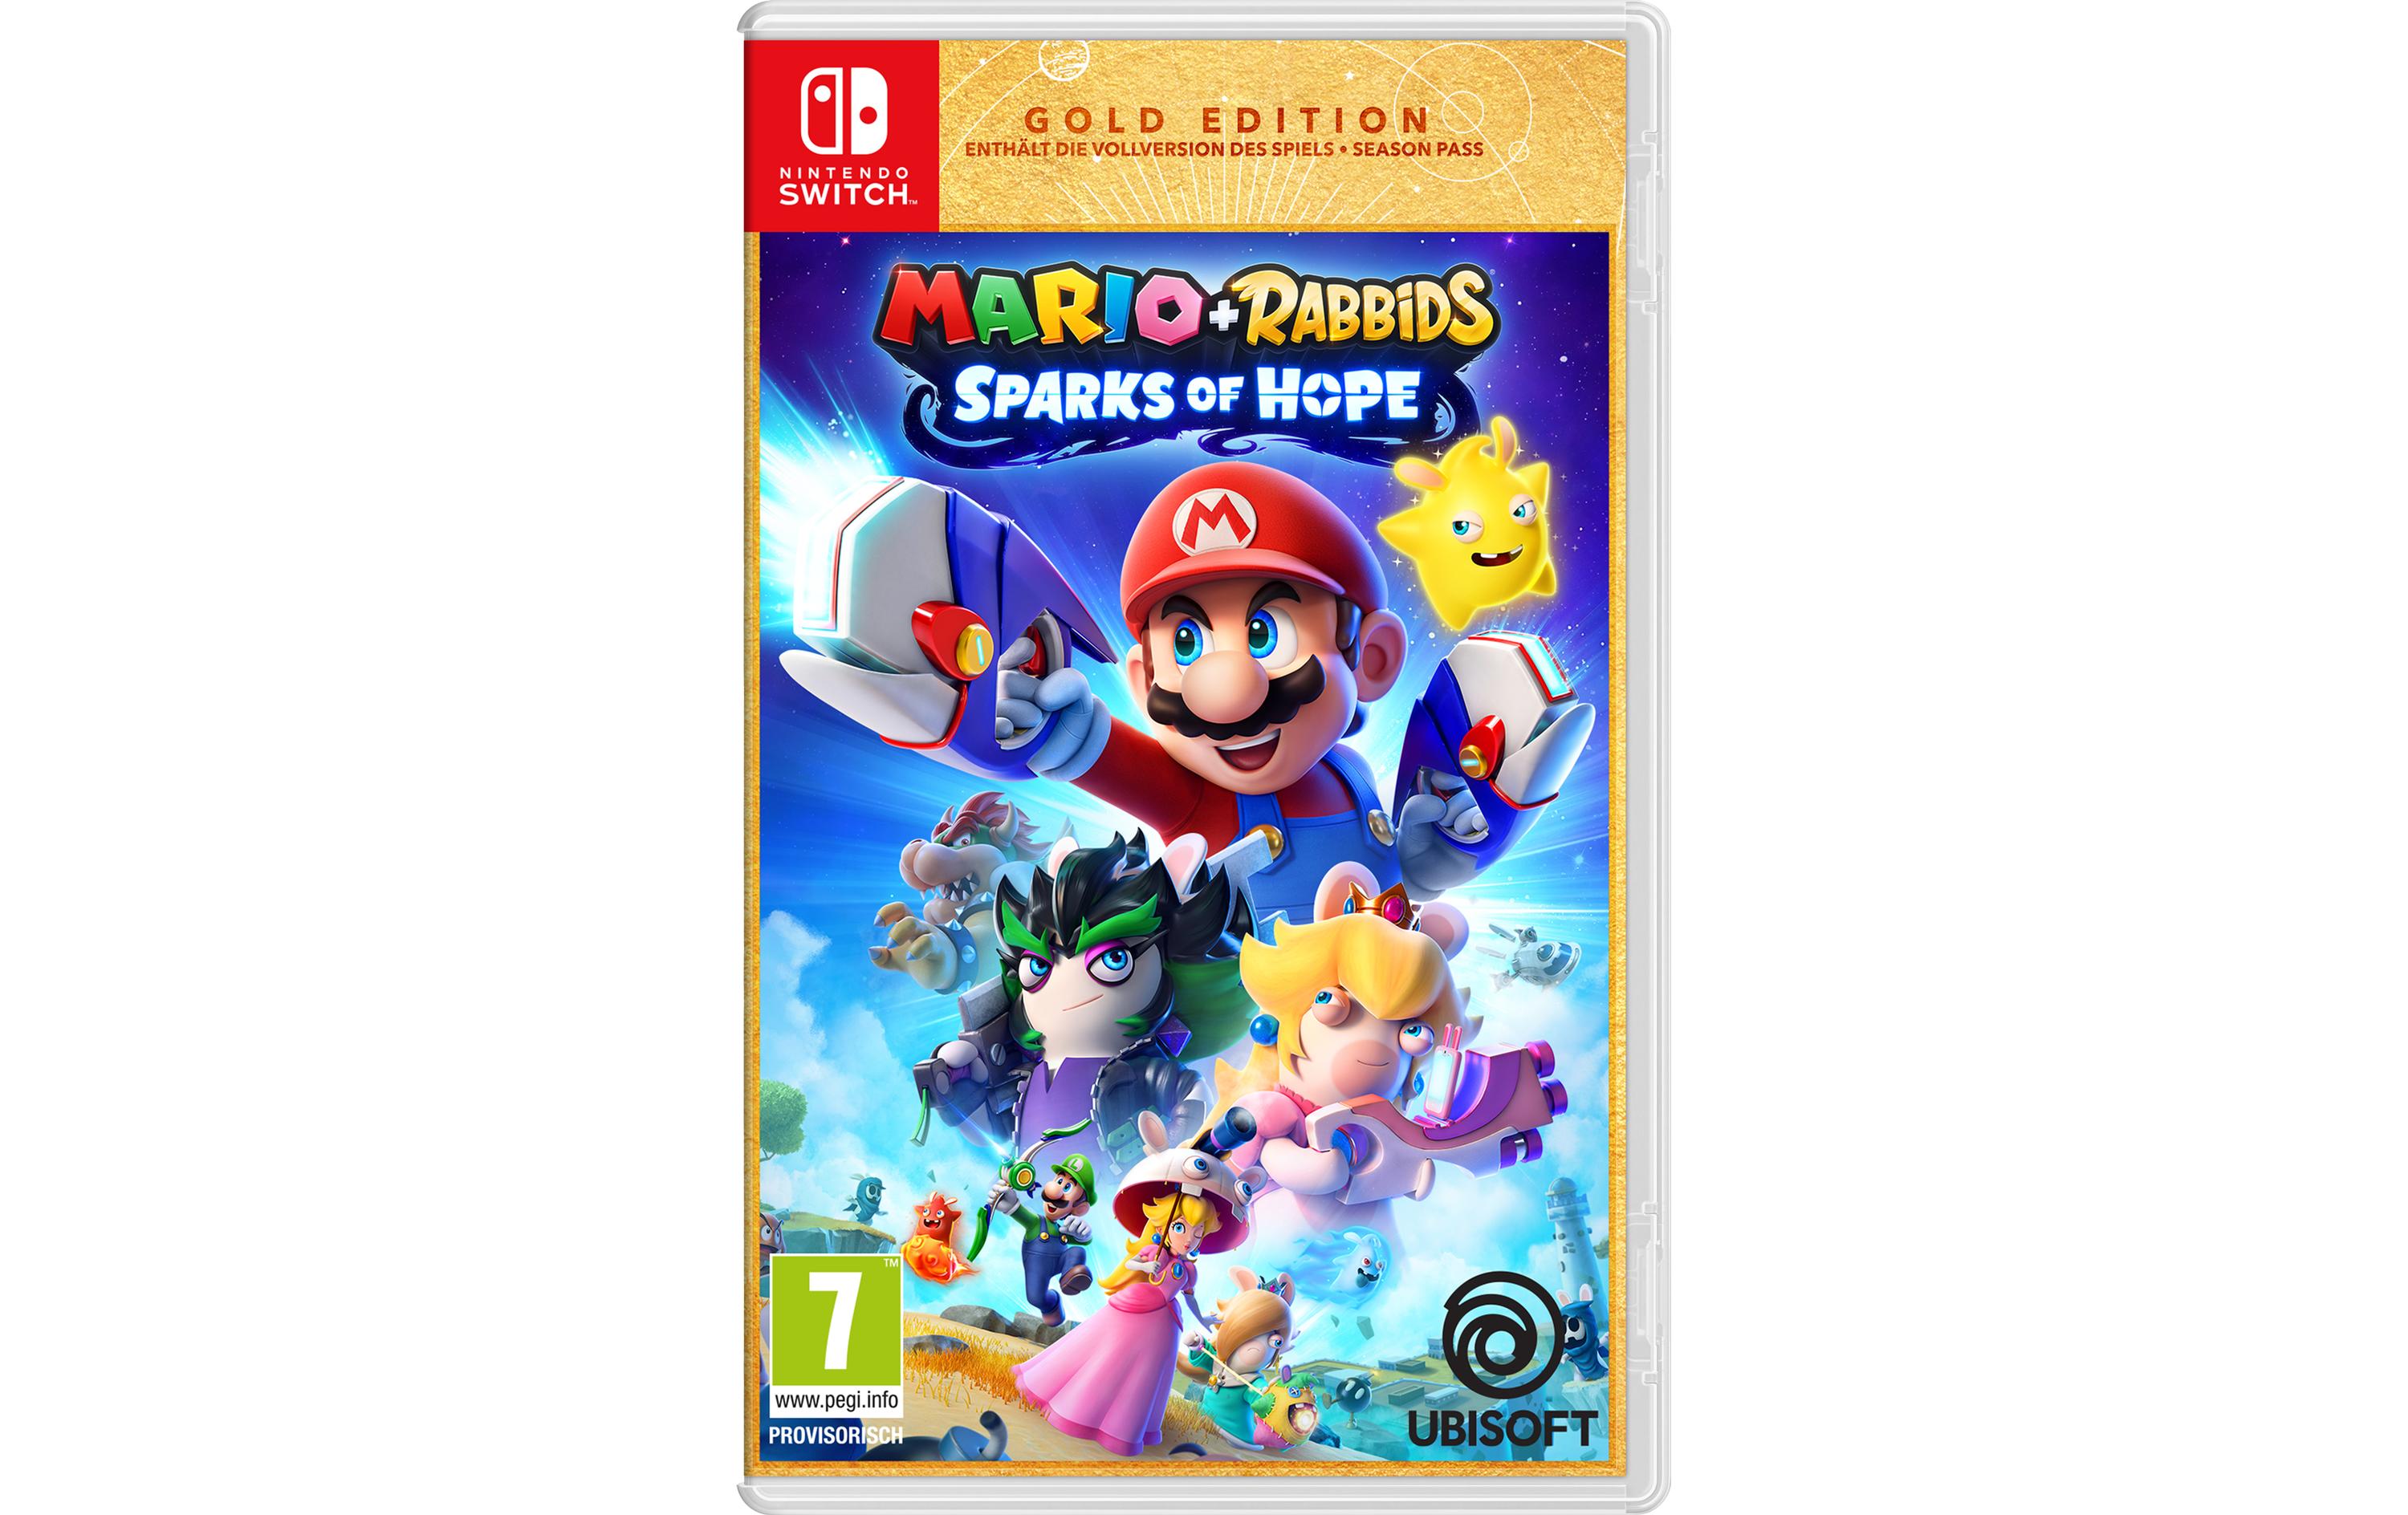 Mario & Switch Sparks Nintendo Hope Rabbids Gold Edition Games of 